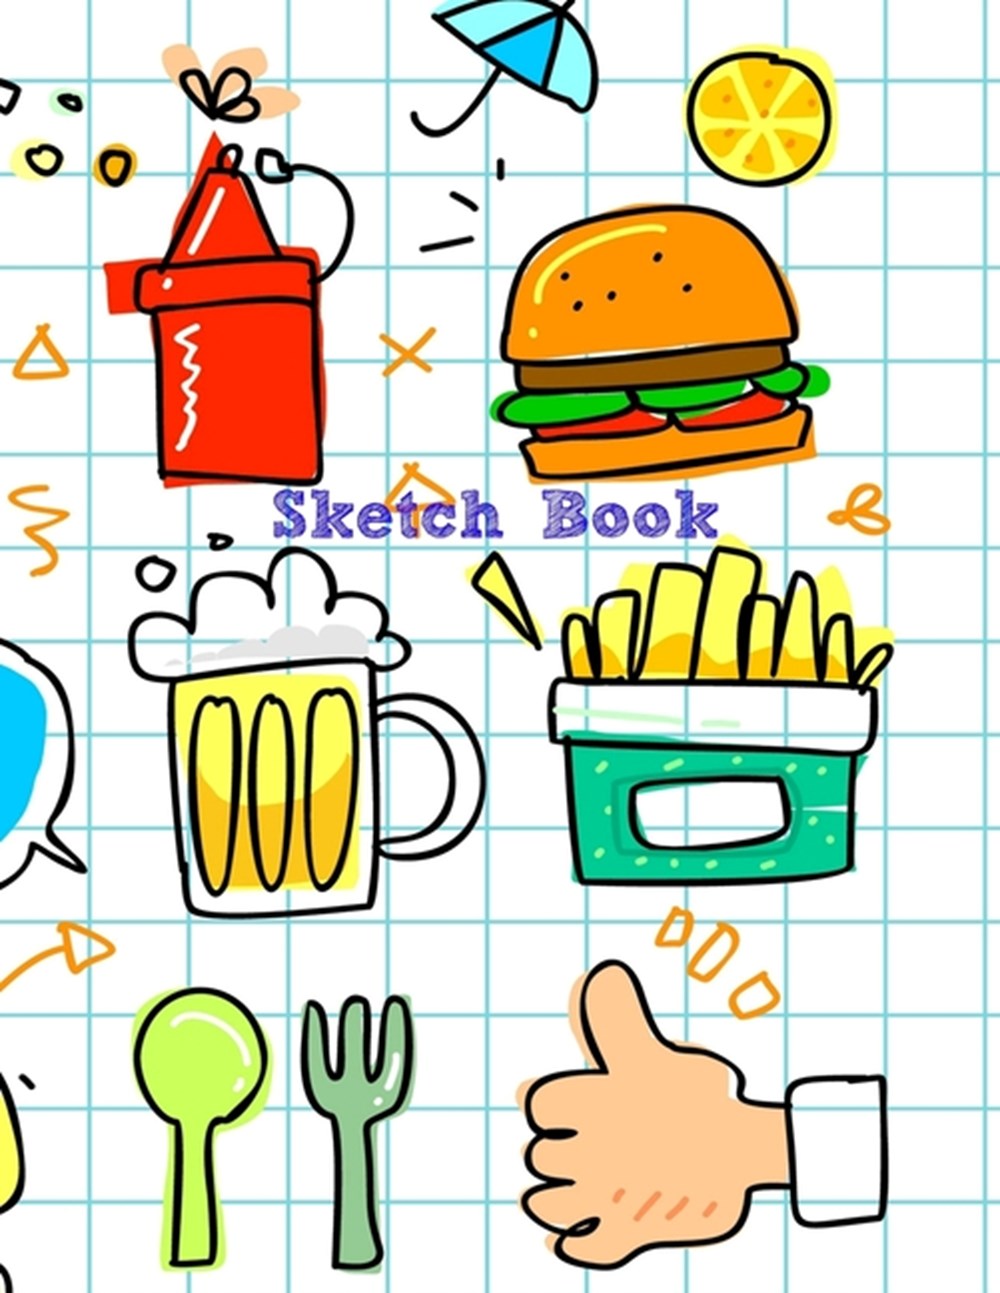 Sketchbook Cartoon Food Theme Cover Paint Drawing and Writing Blank Page Sketch book Journal for Per